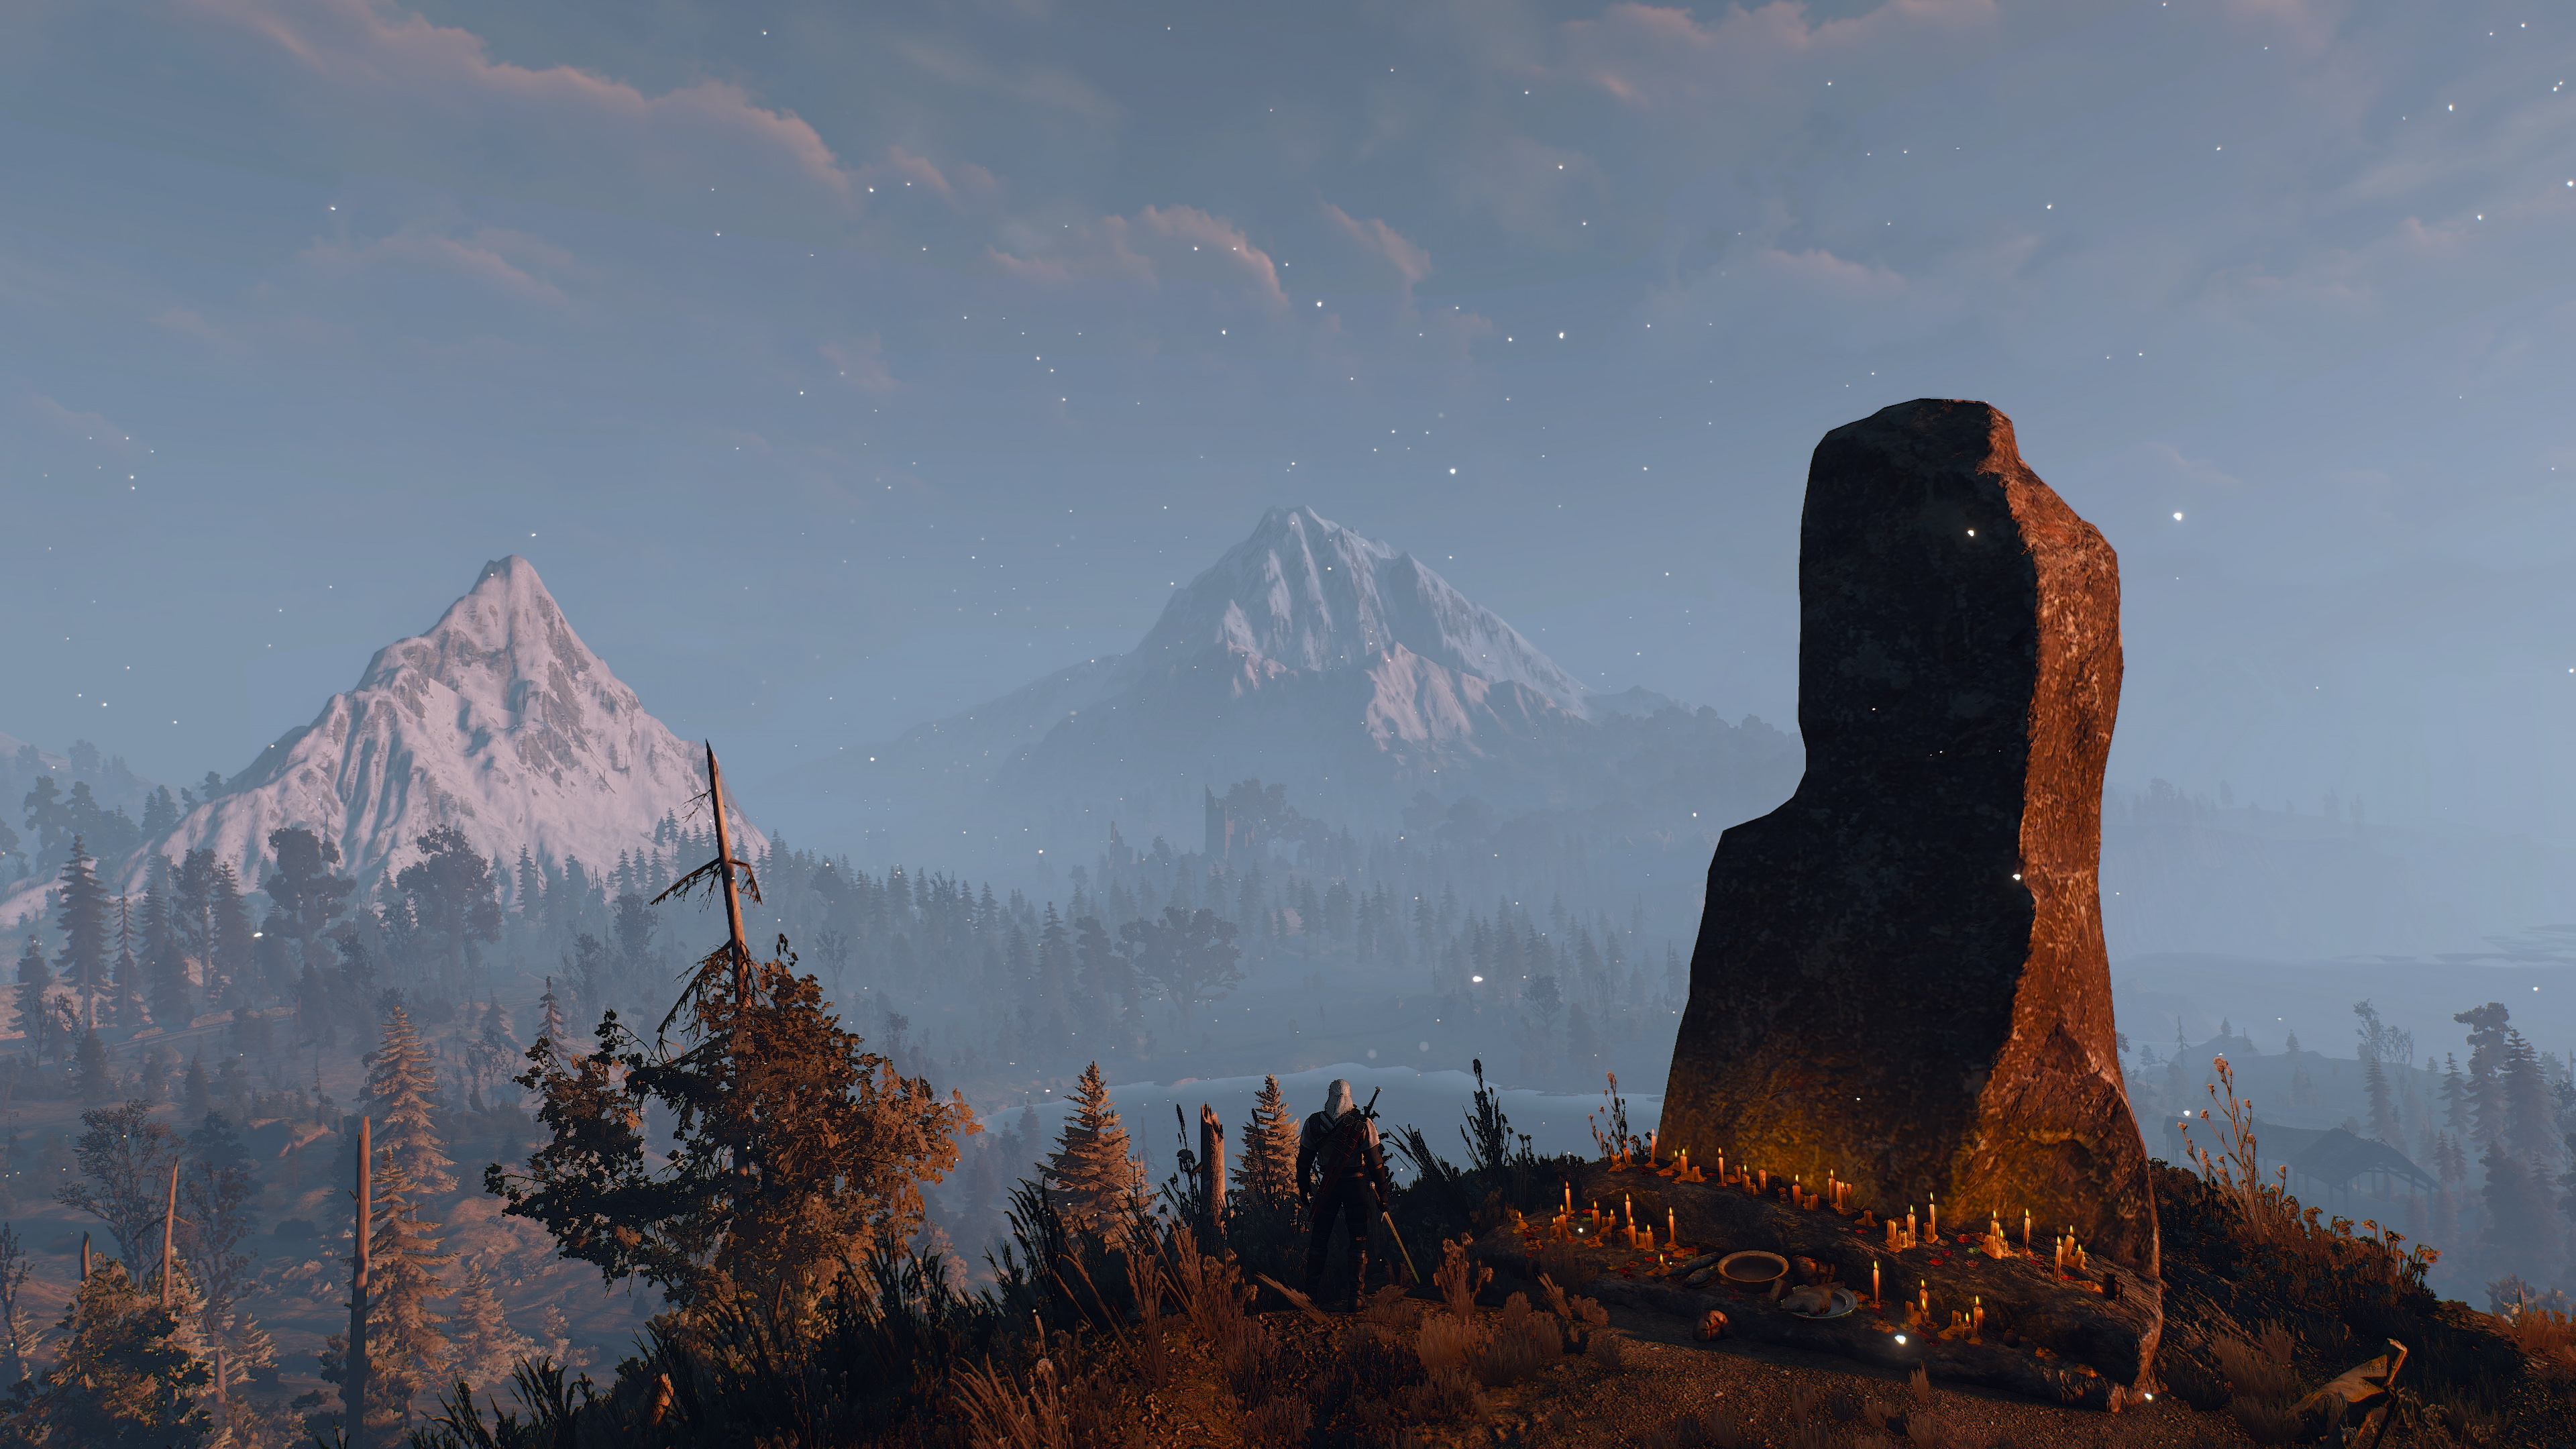 General 3840x2160 The Witcher The Witcher 3: Wild Hunt Geralt of Rivia CD Projekt RED screen shot